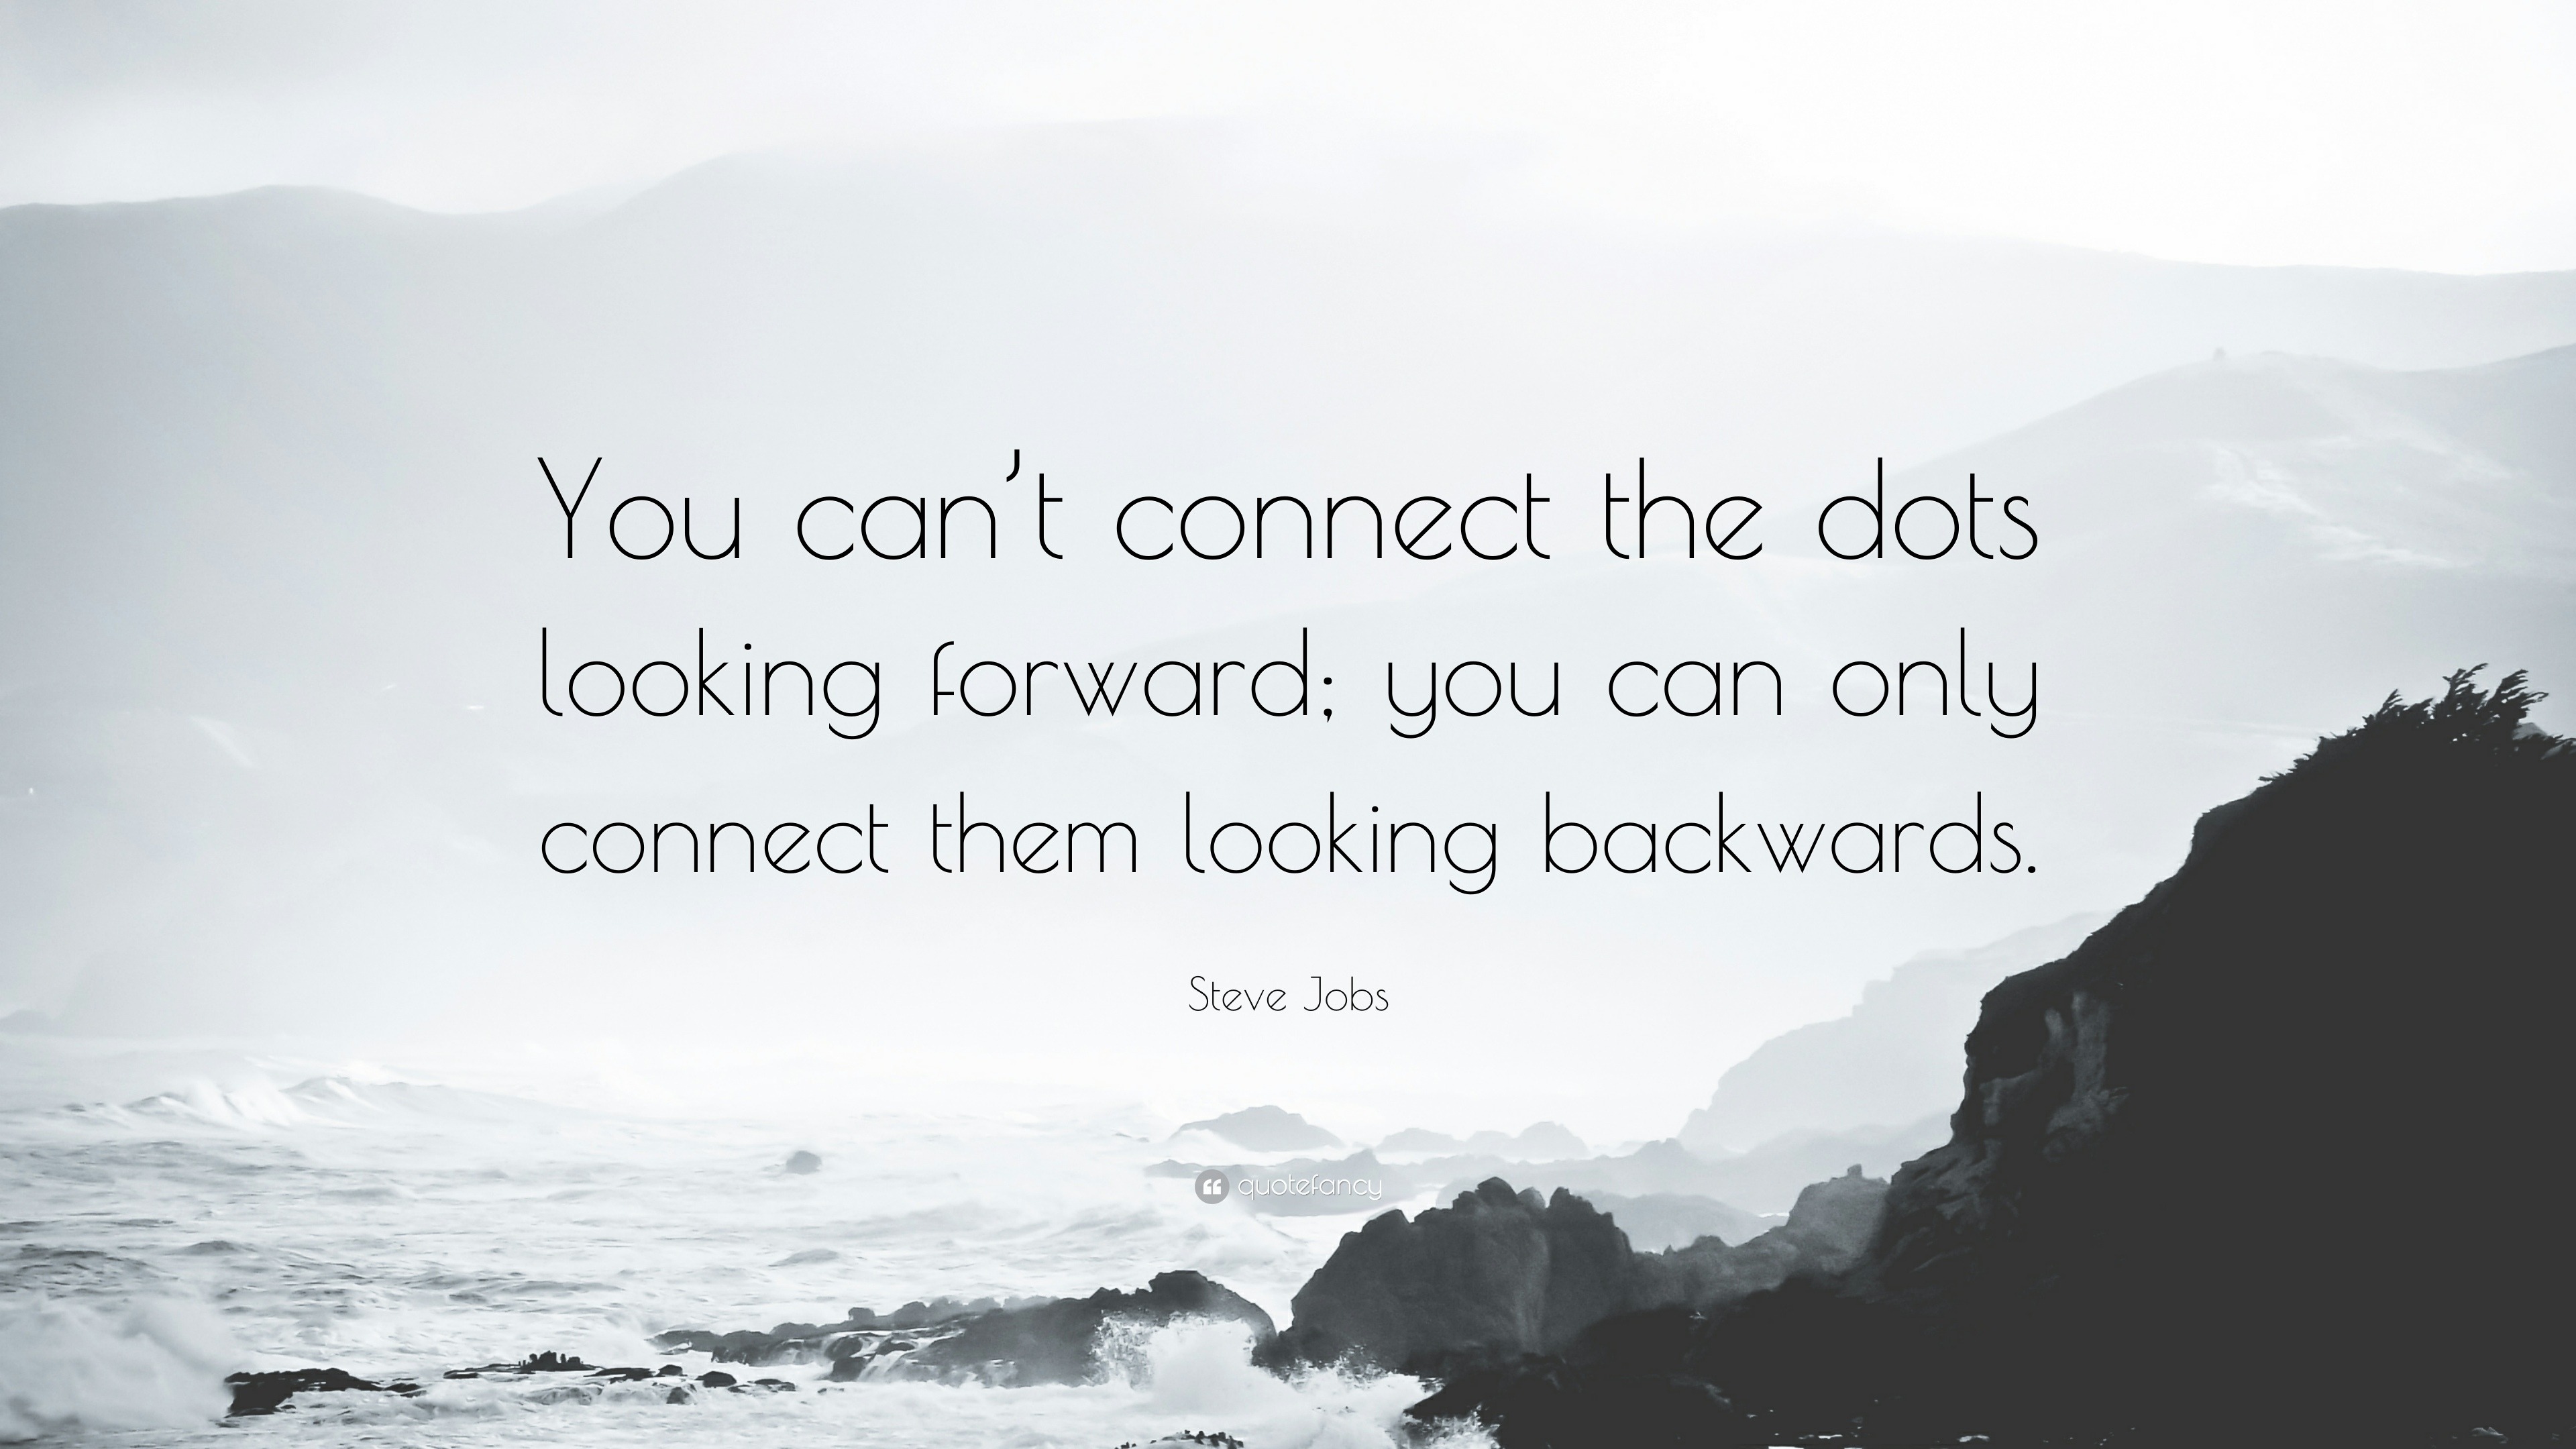 Steve Jobs Quote: “You can't connect the dots looking forward; you can only  connect them